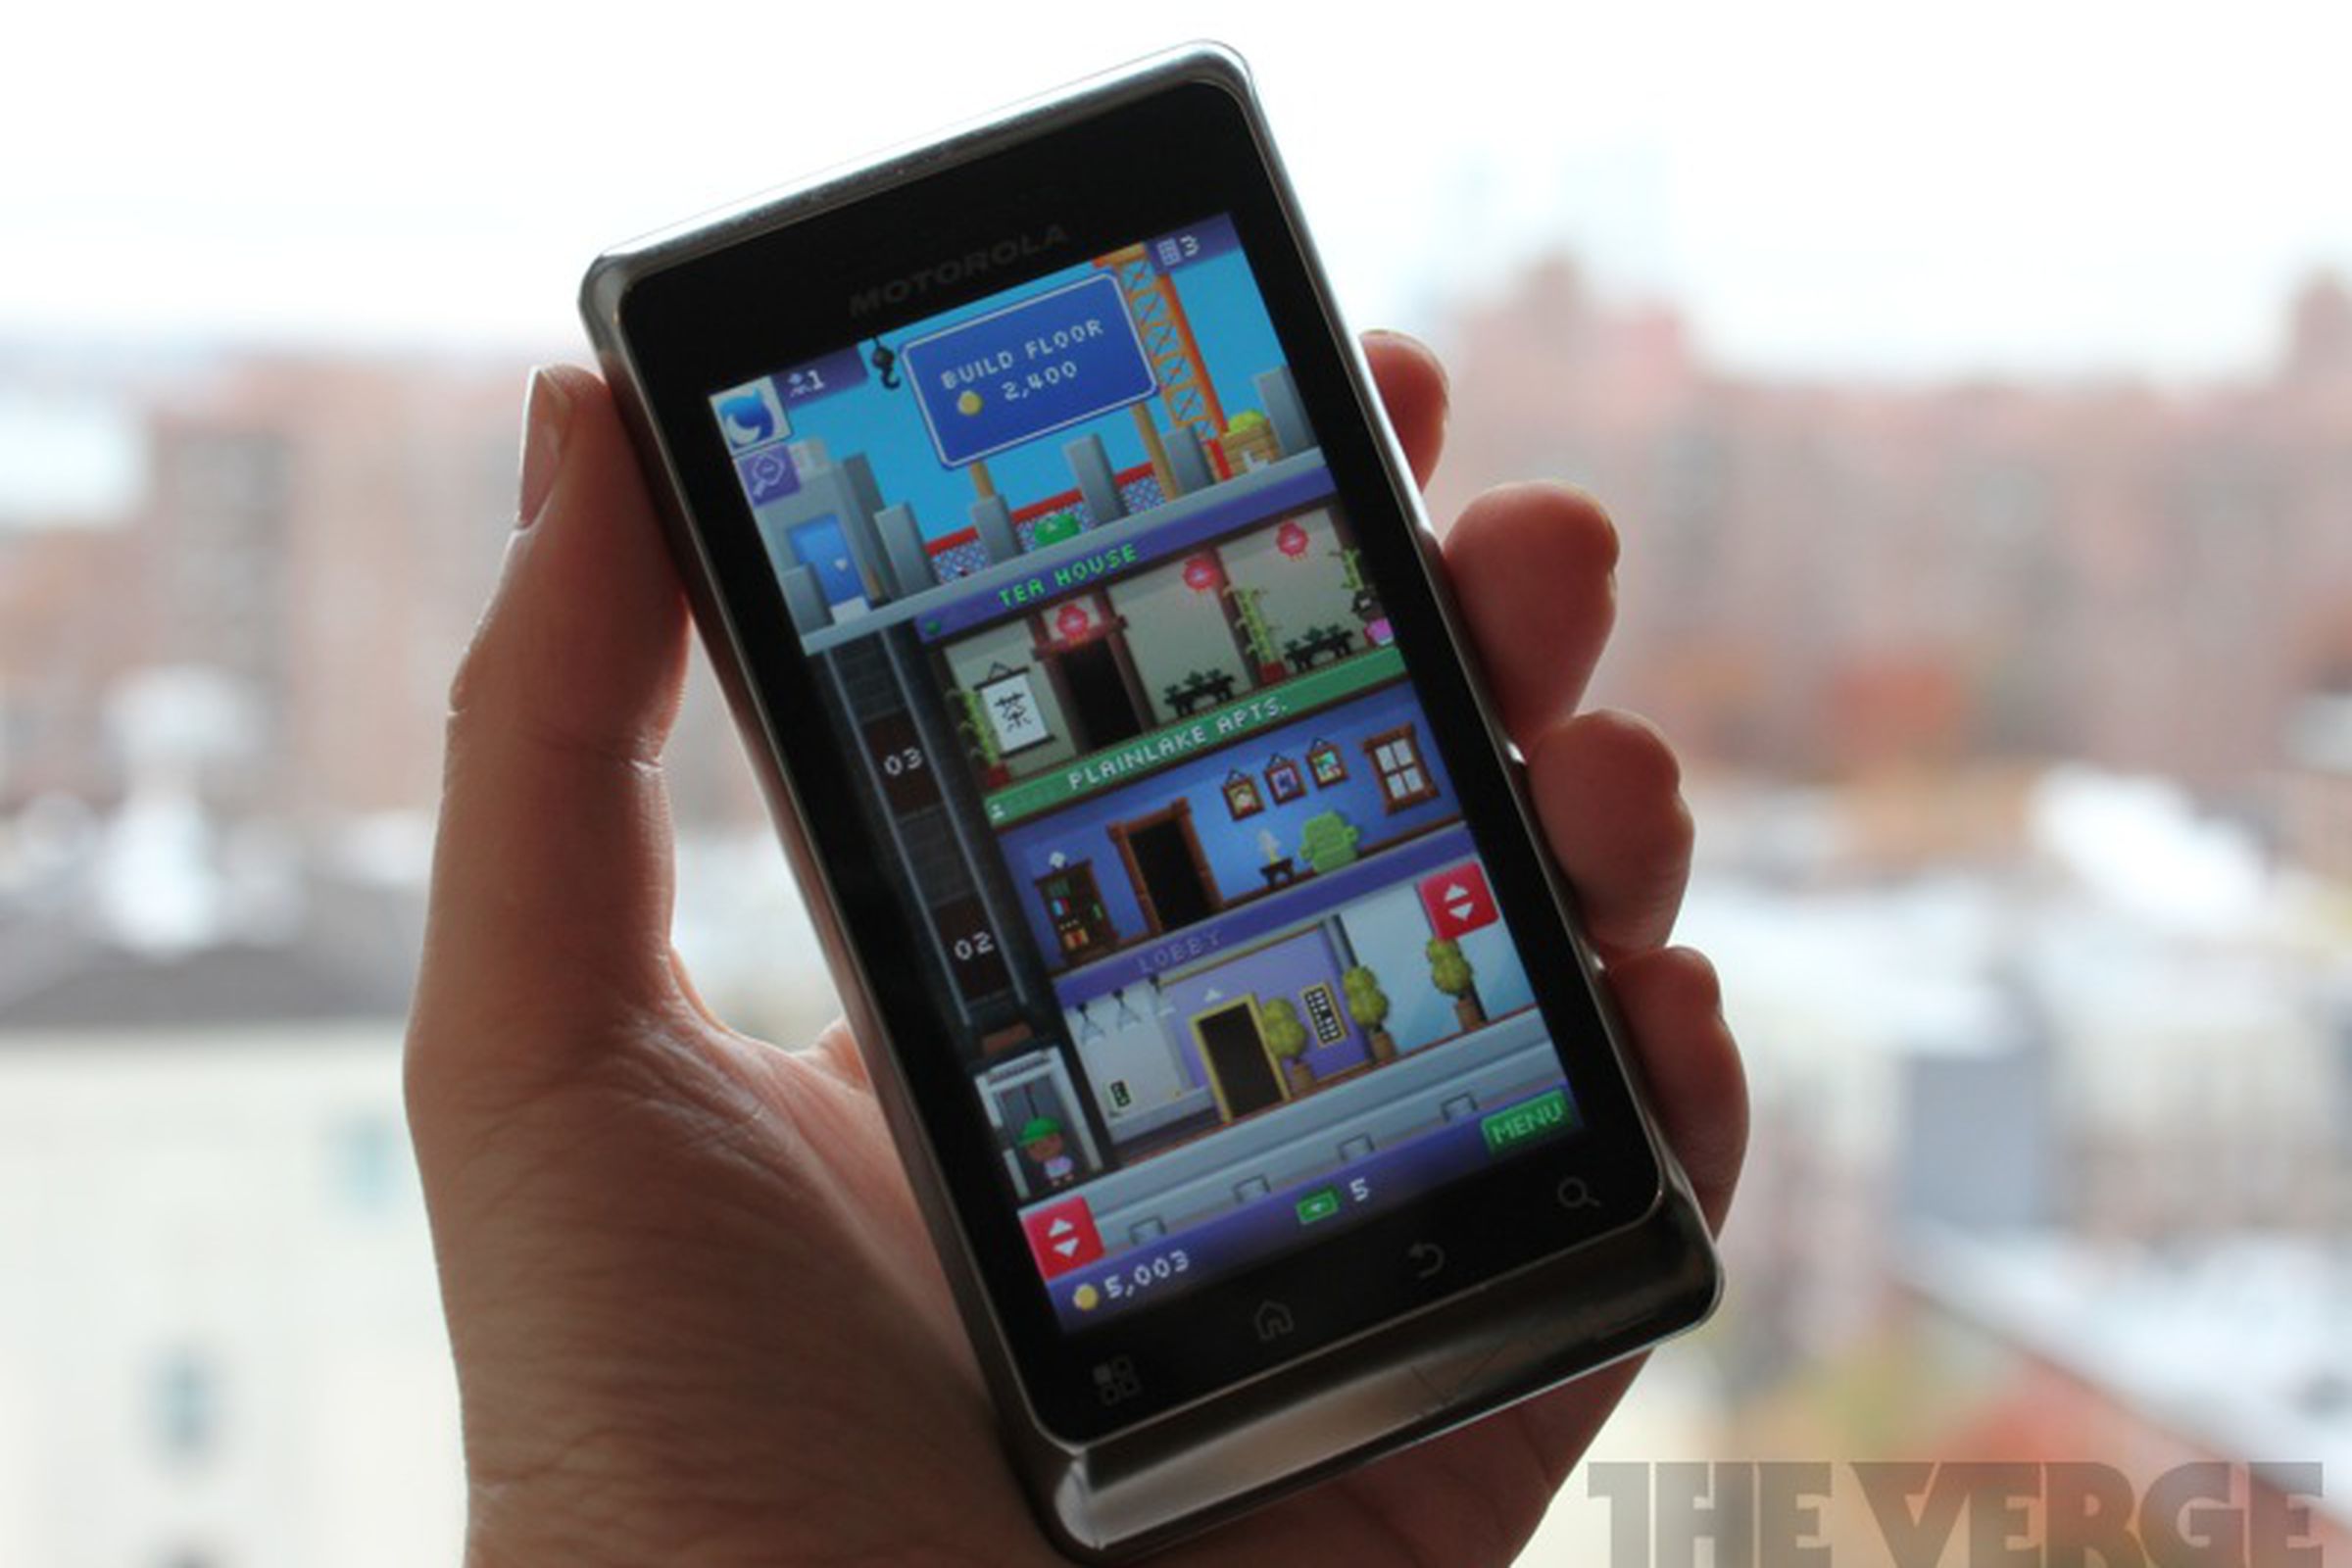 Tiny Tower Android